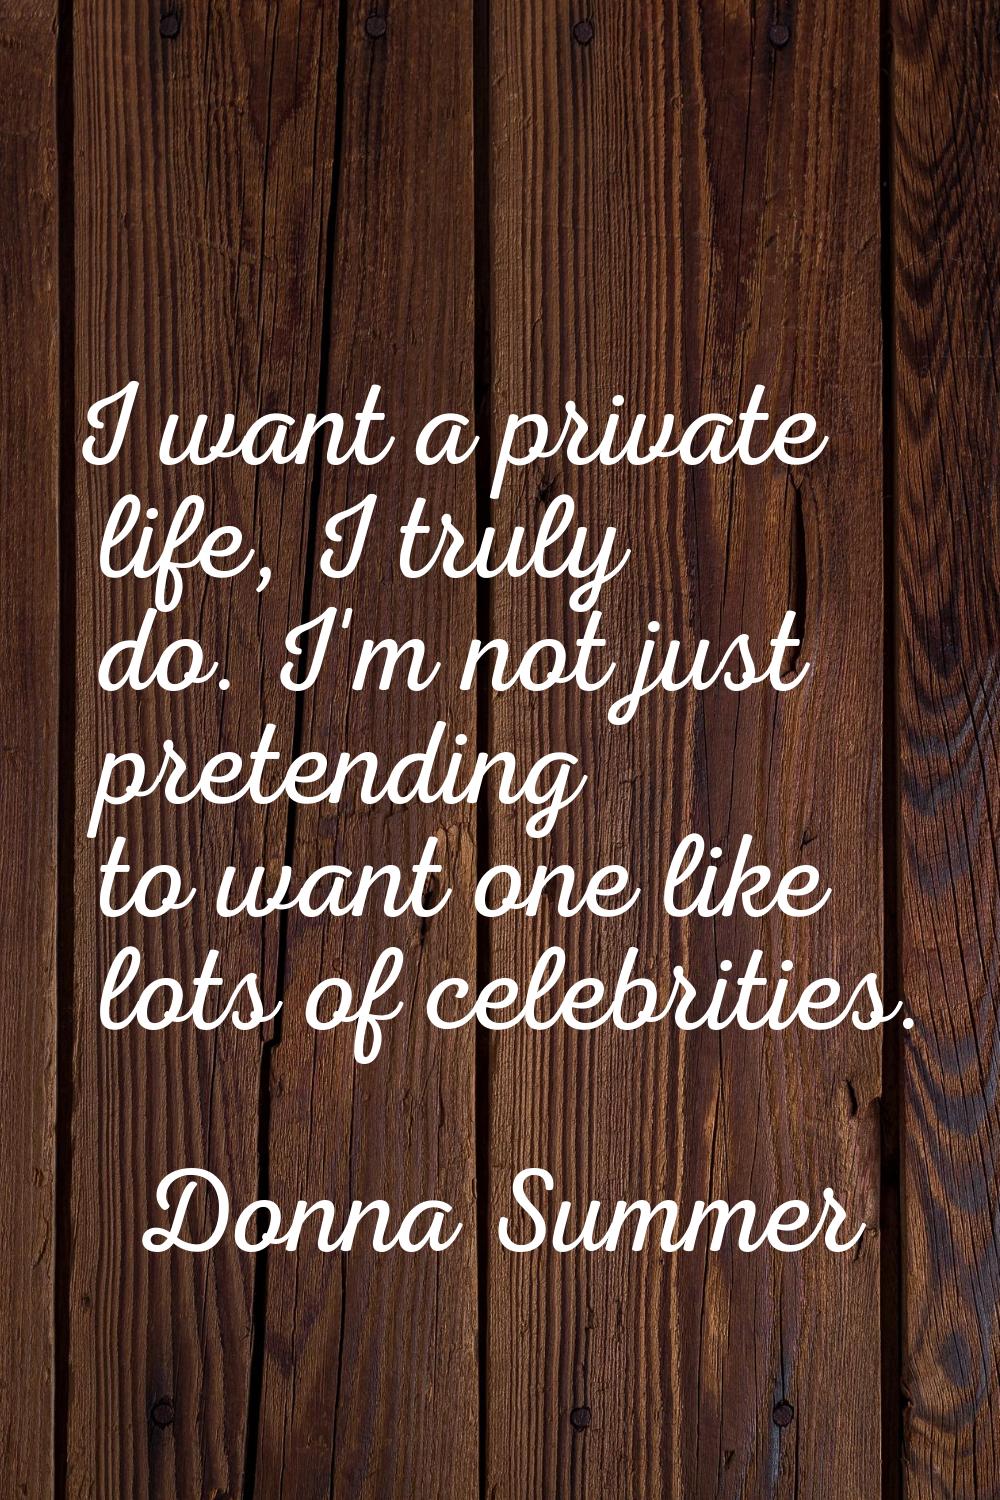 I want a private life, I truly do. I'm not just pretending to want one like lots of celebrities.